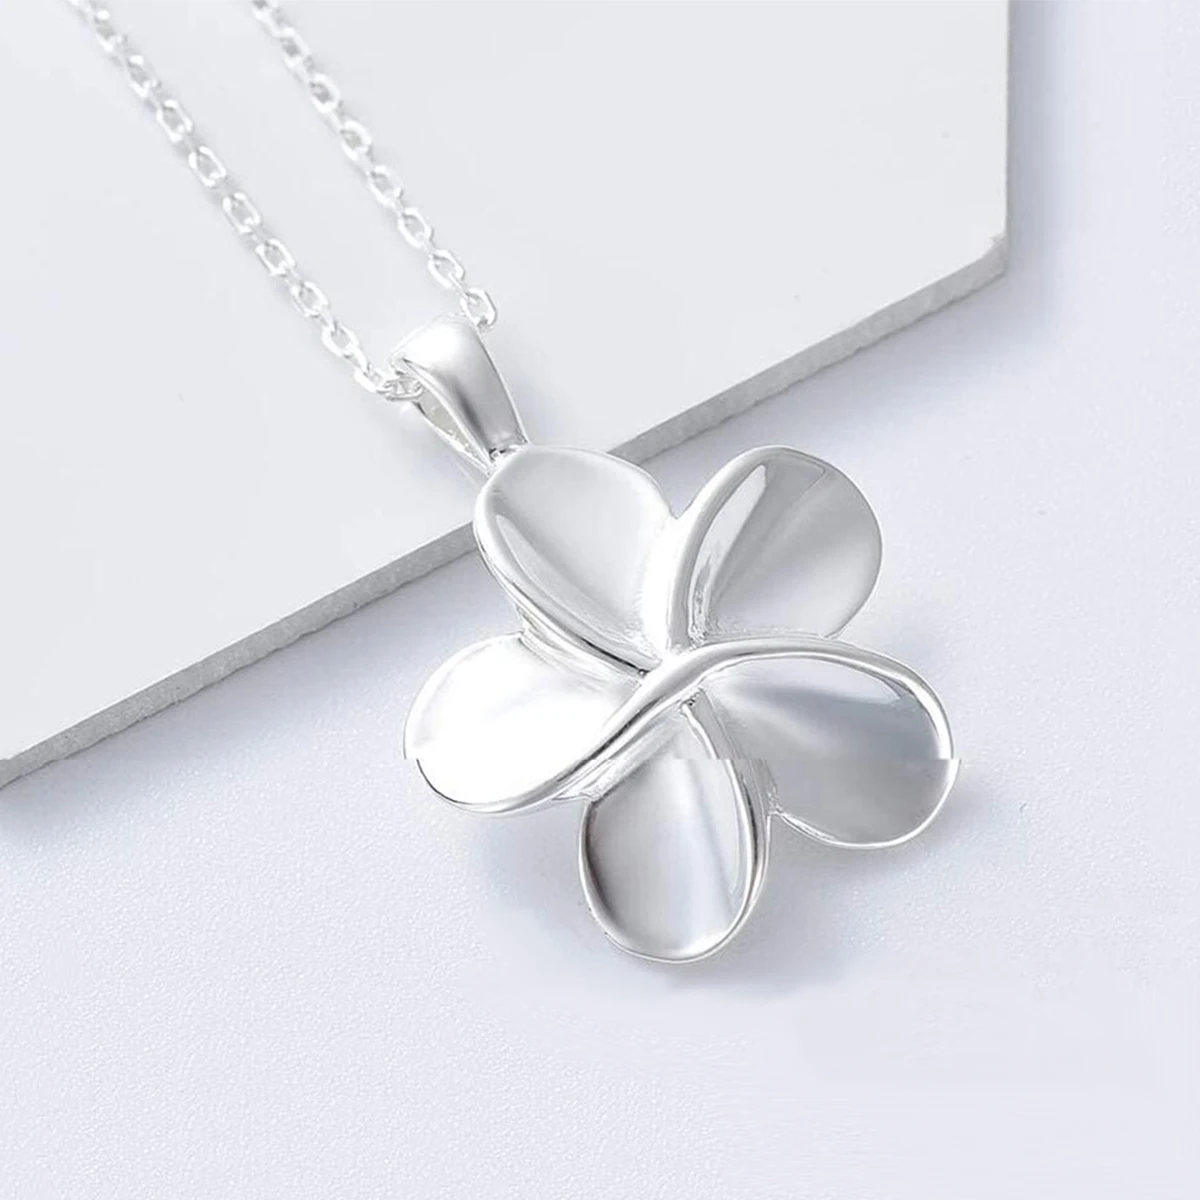 Stainless steel Flower Cremation Ashes Jewelry Cremation Necklace Memorial Locket for Ashes Keepsake Urn Pendants for Women